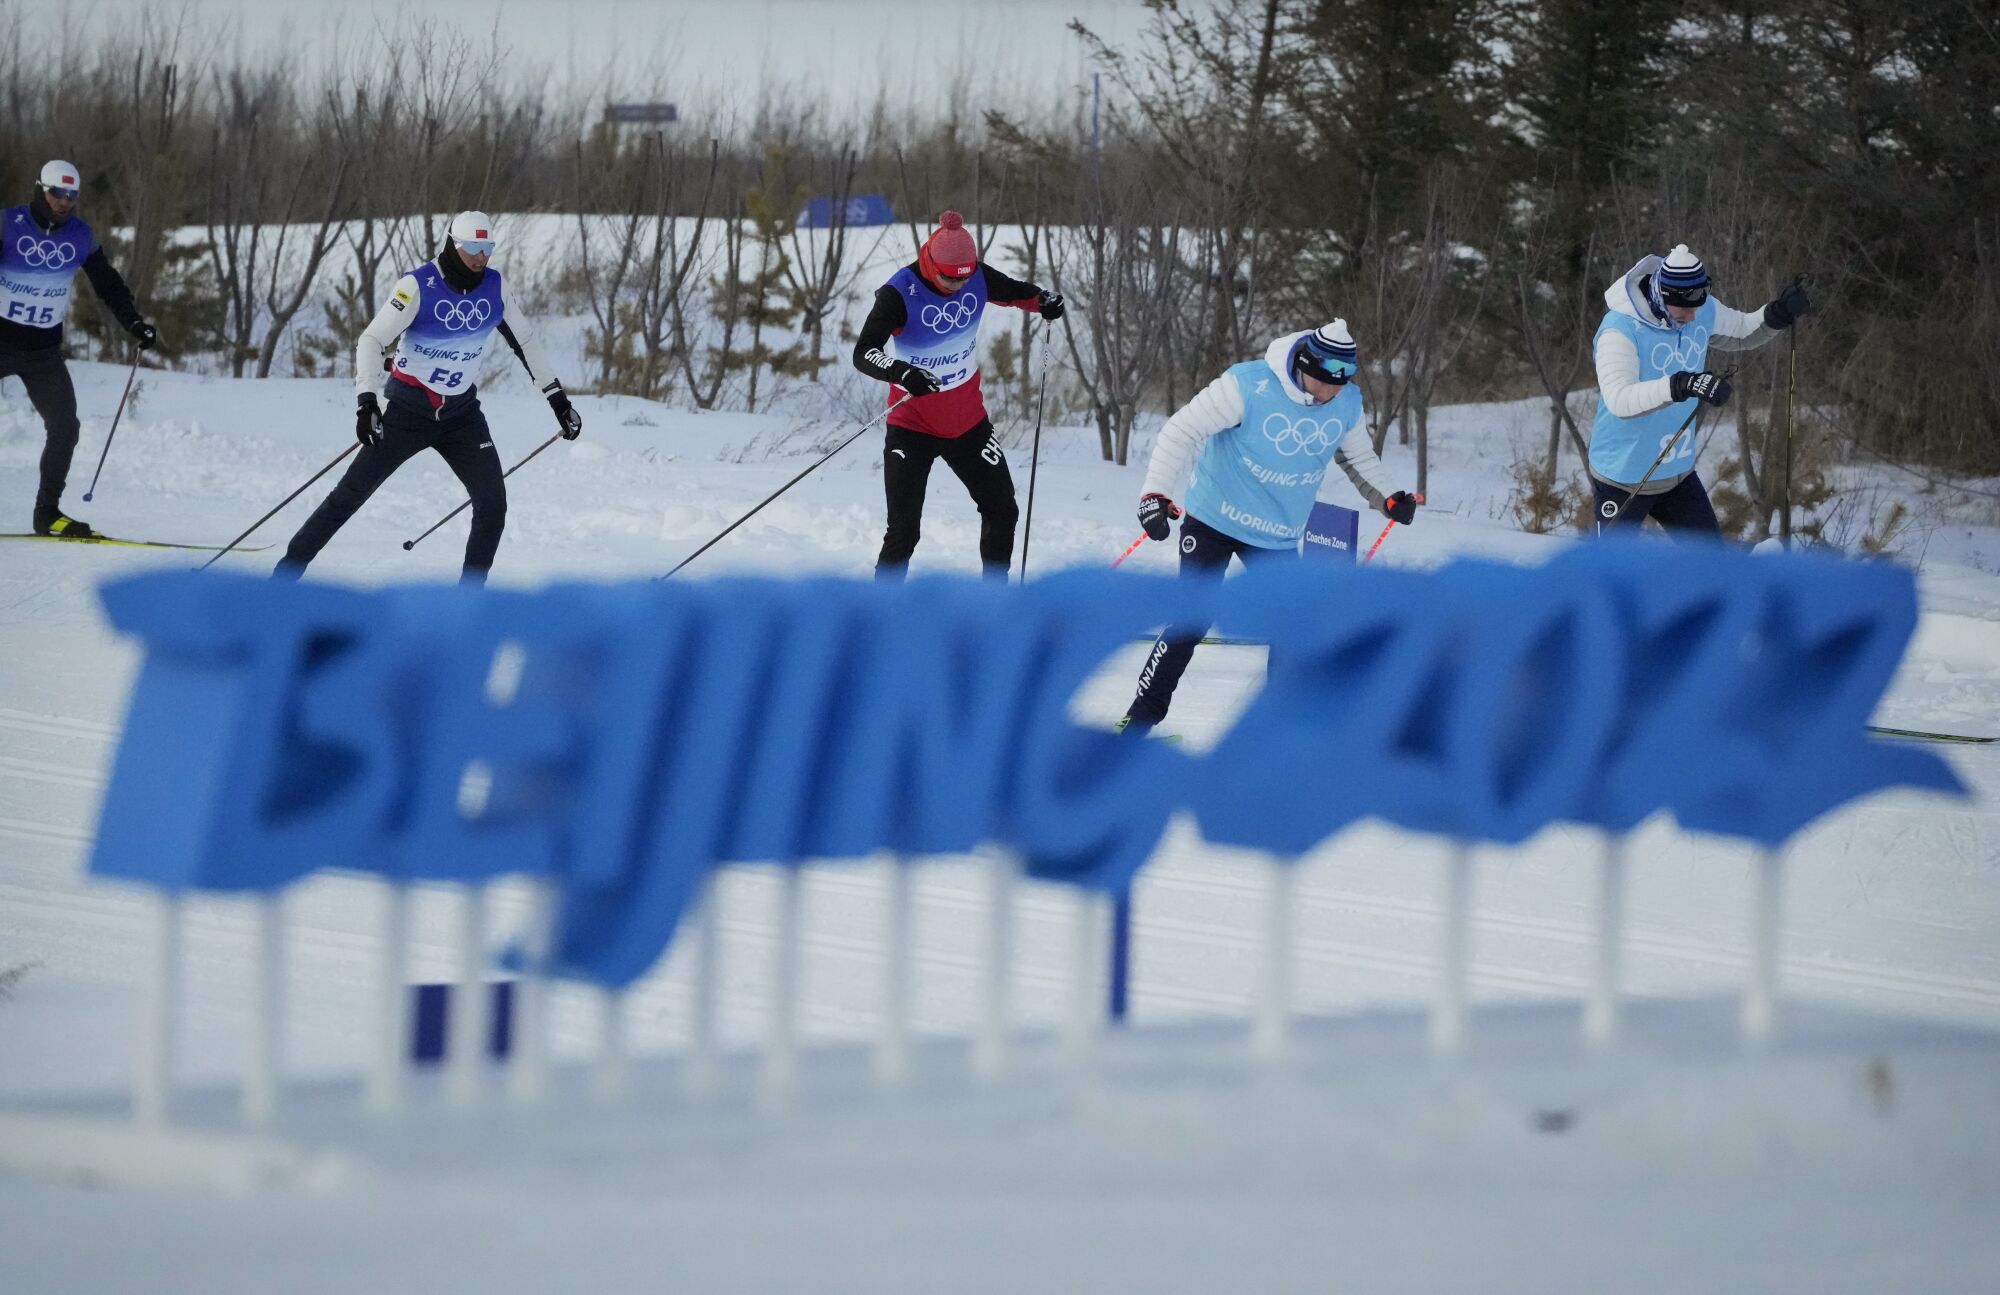 Cross-country skiers practice behind a "Beijing 2022" sign during a training session 